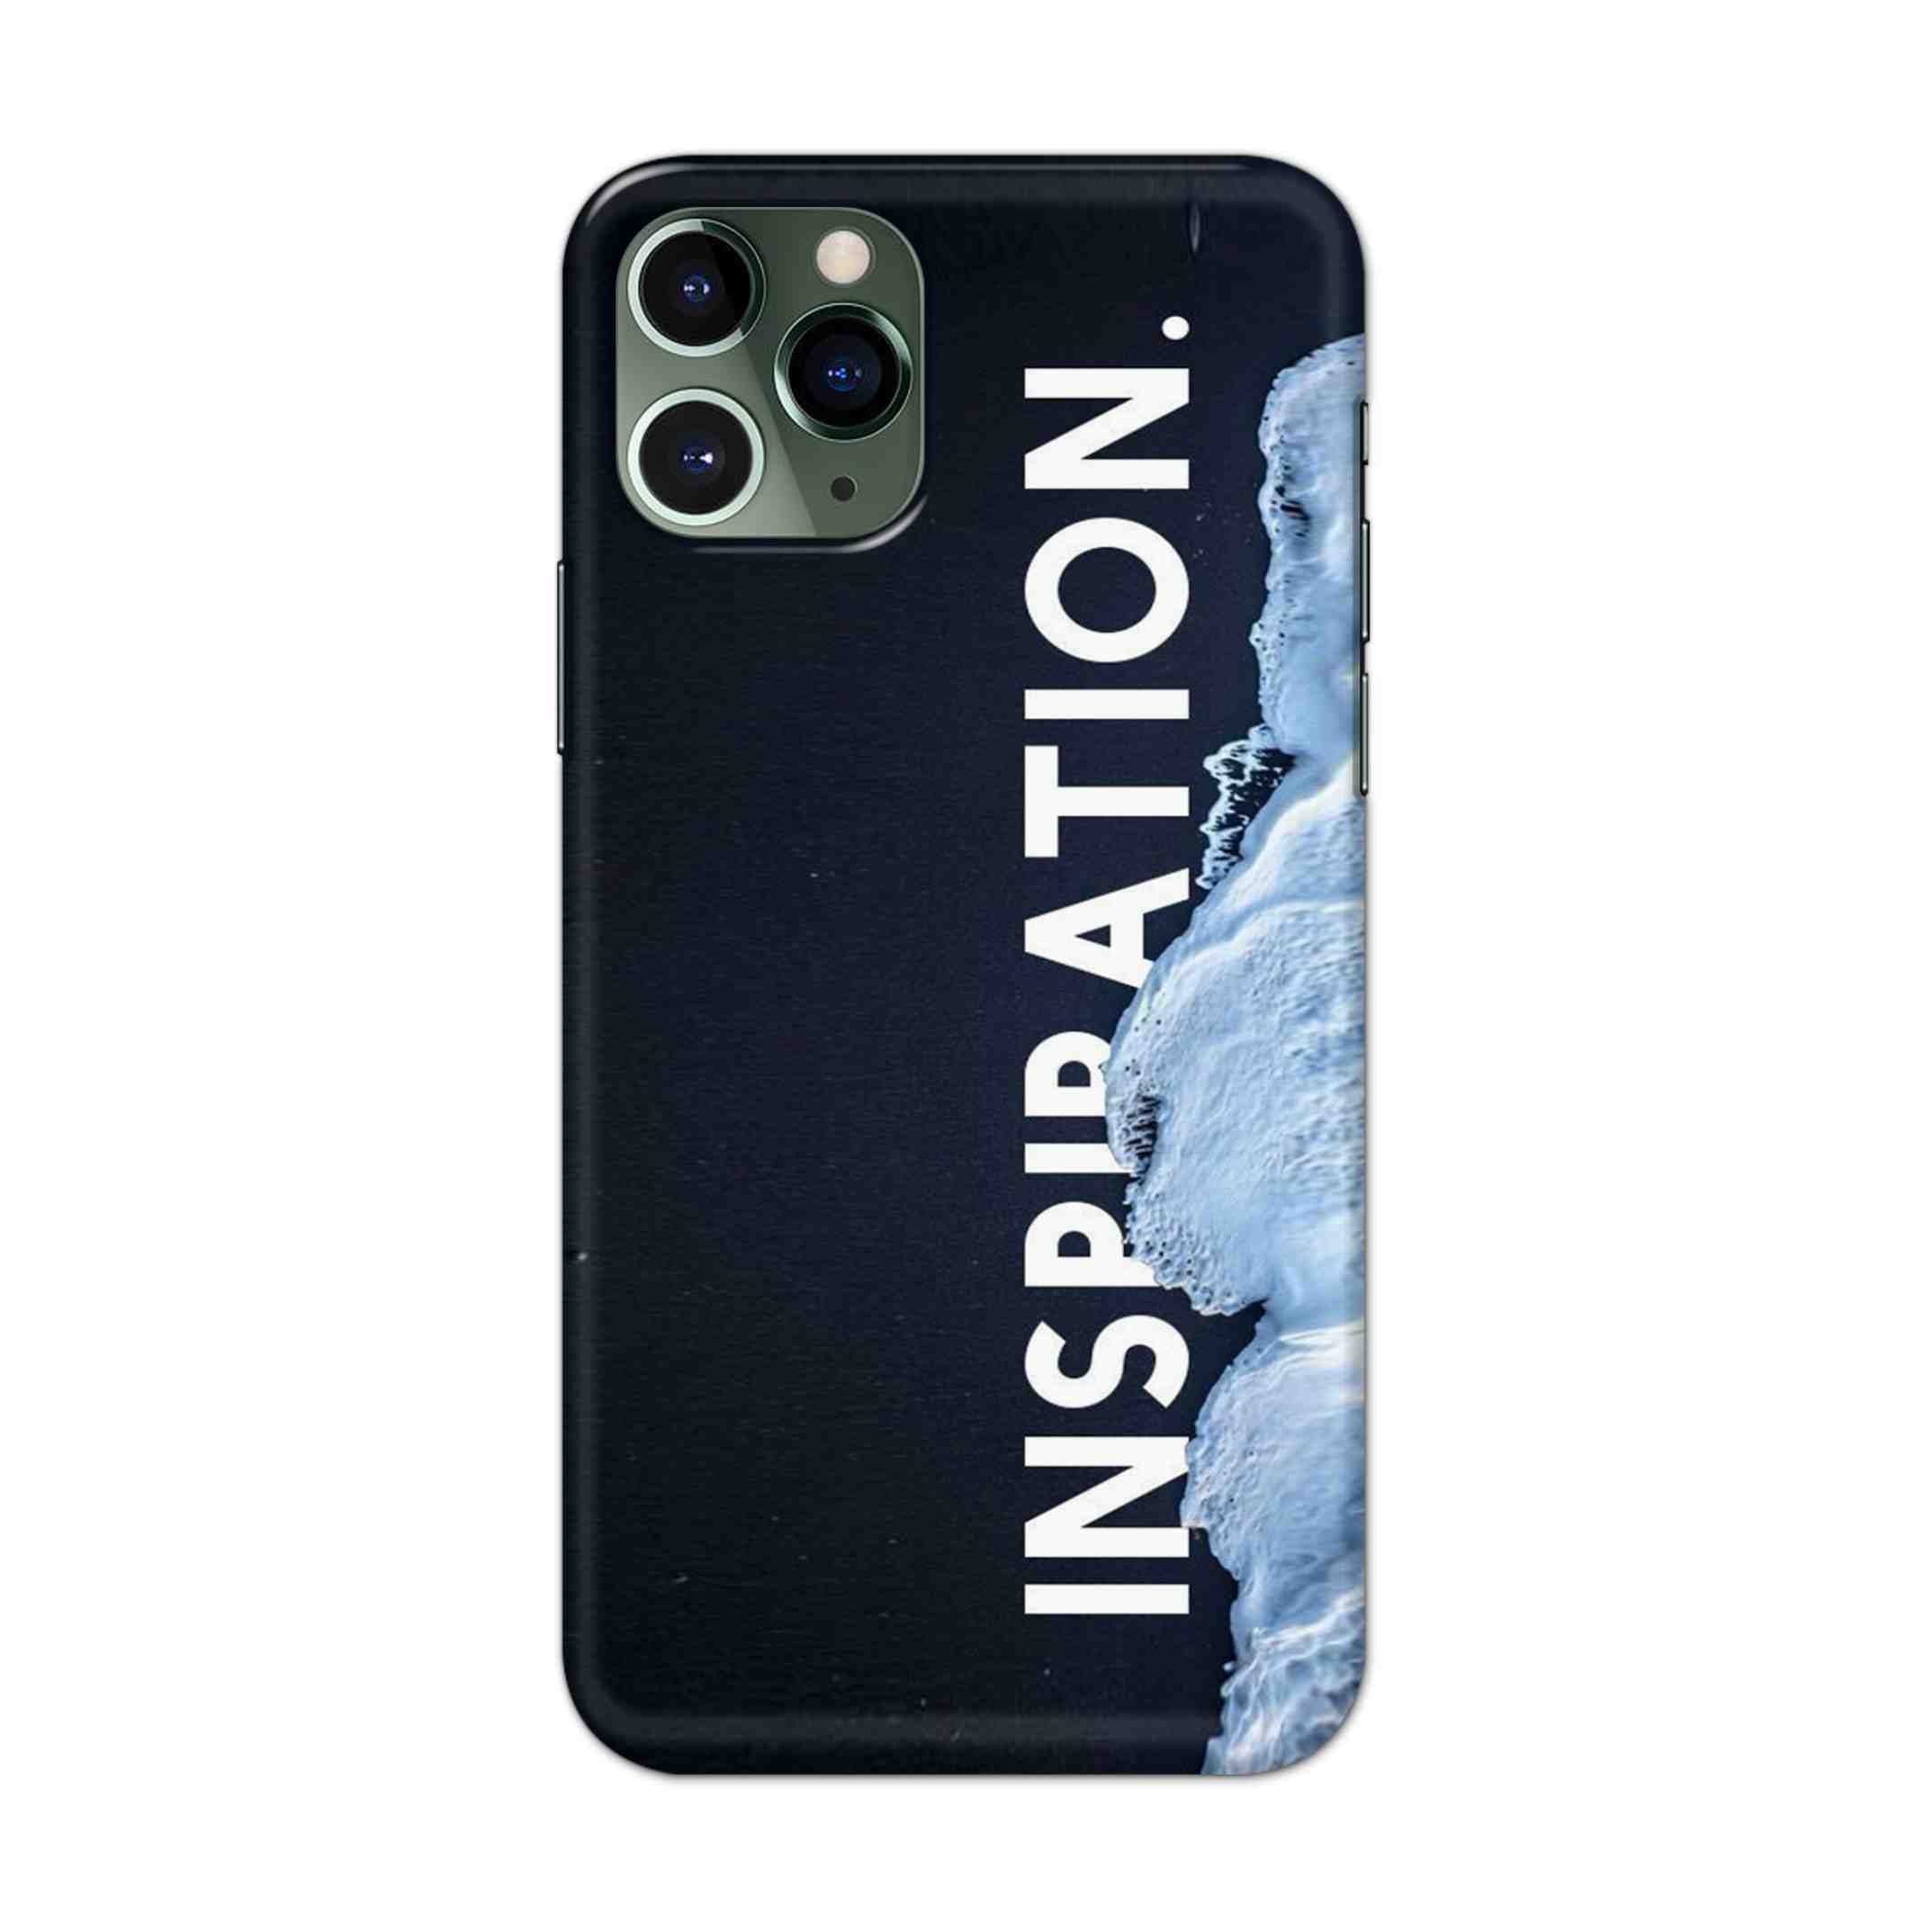 Buy Inspiration Hard Back Mobile Phone Case/Cover For iPhone 11 Pro Max Online